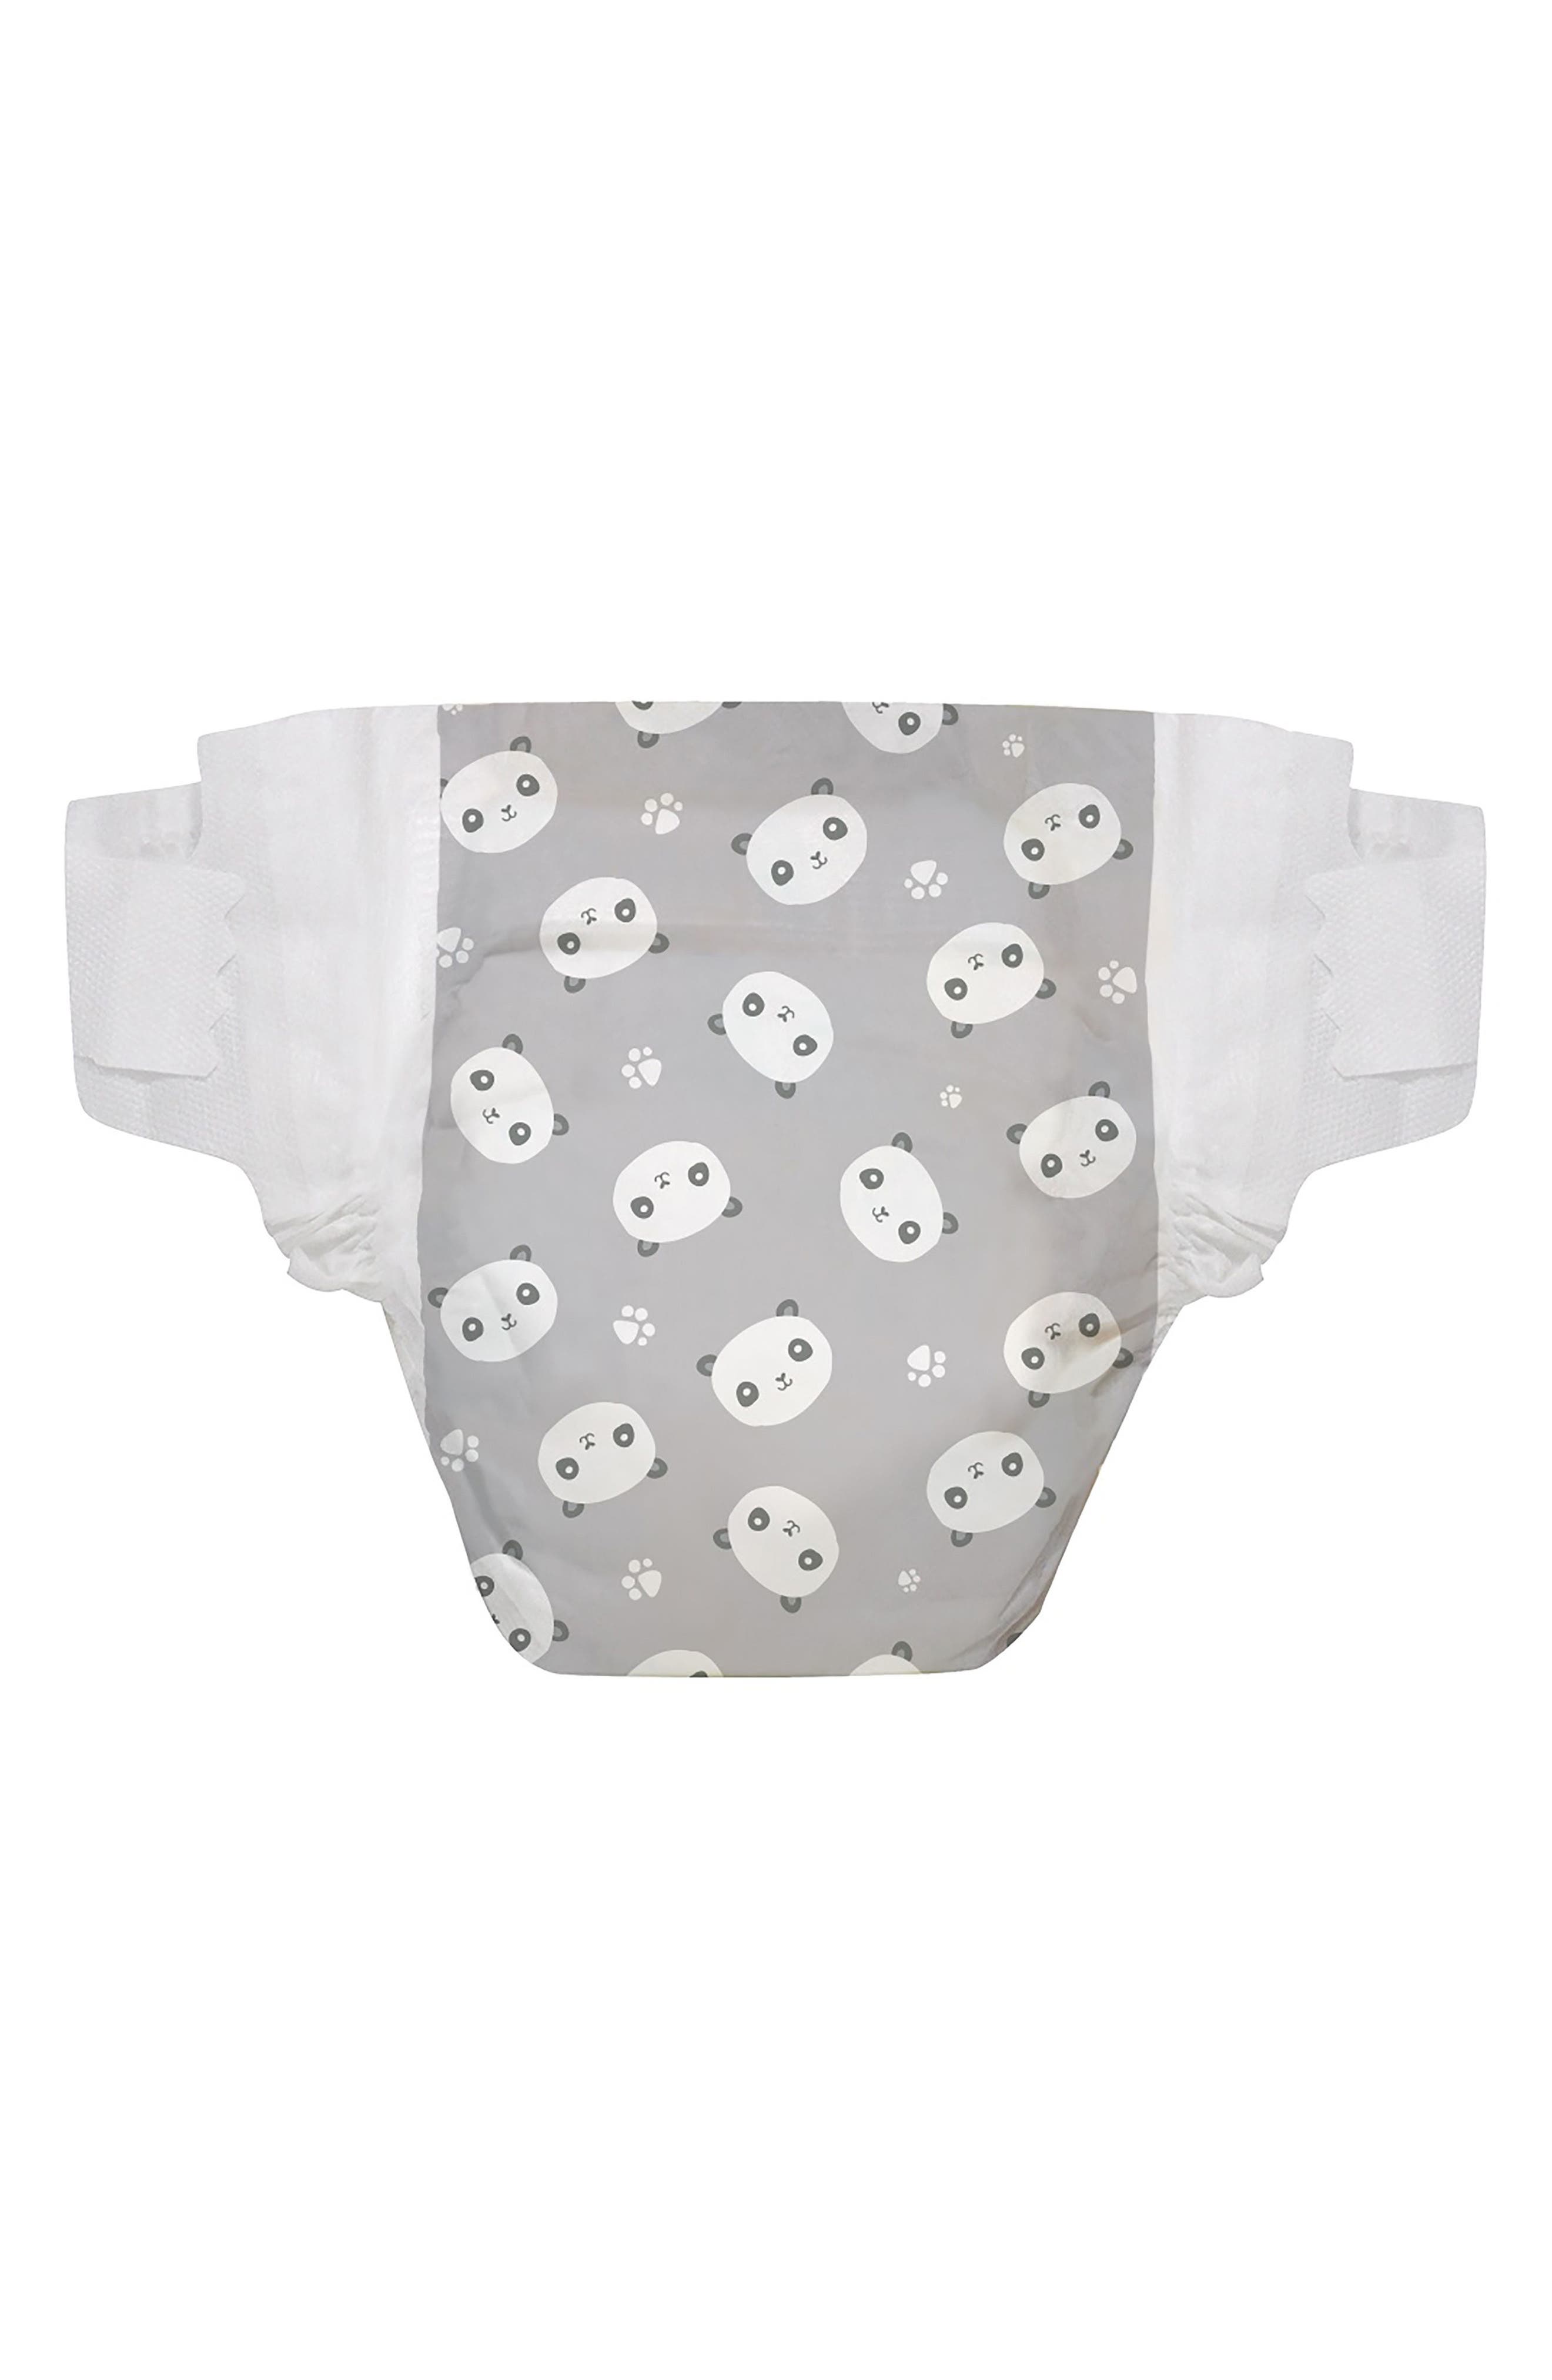 UPC 816645020187 product image for Infant The Honest Company 'Multicolored Giraffe' Diapers, Size 4 - None | upcitemdb.com